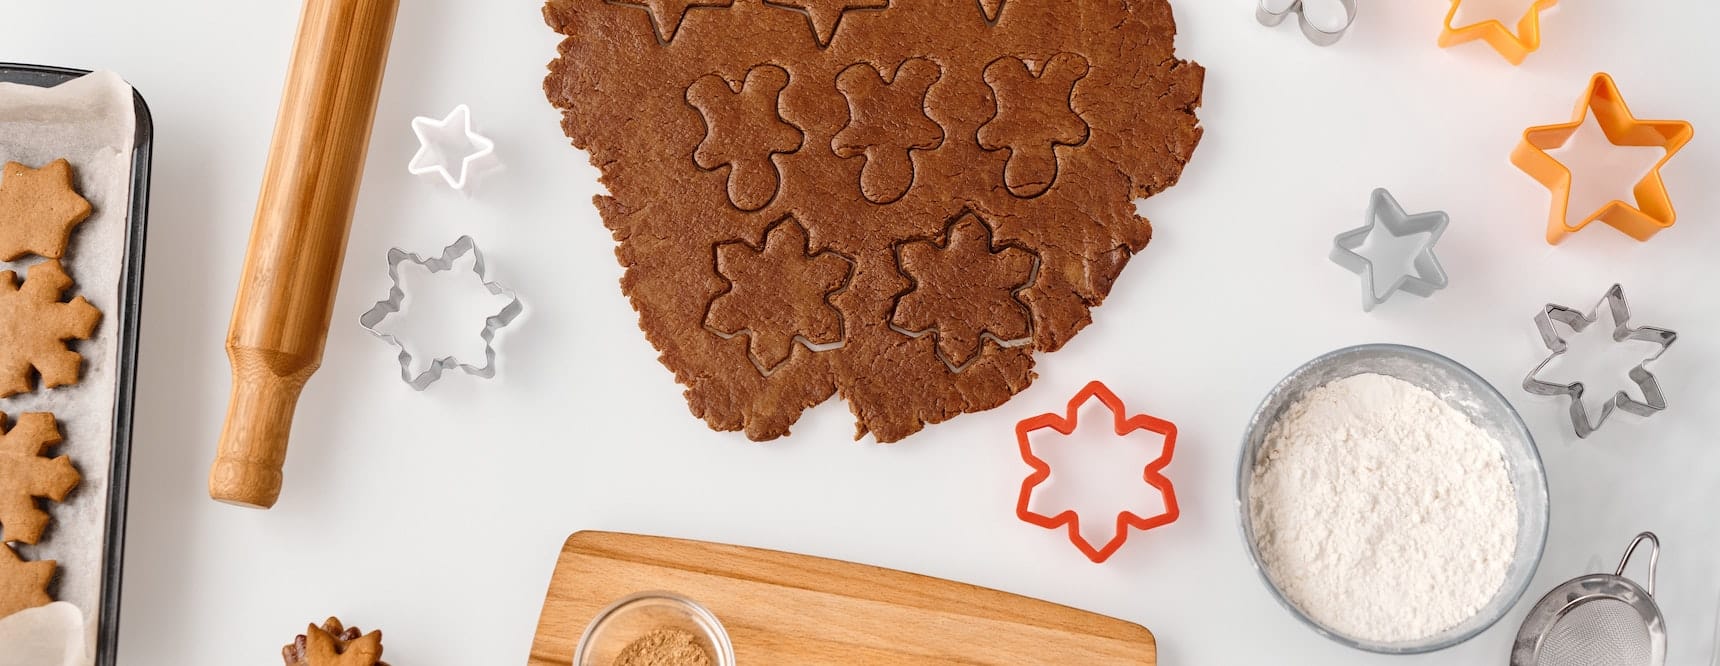 Person Using a Cookie Cutter